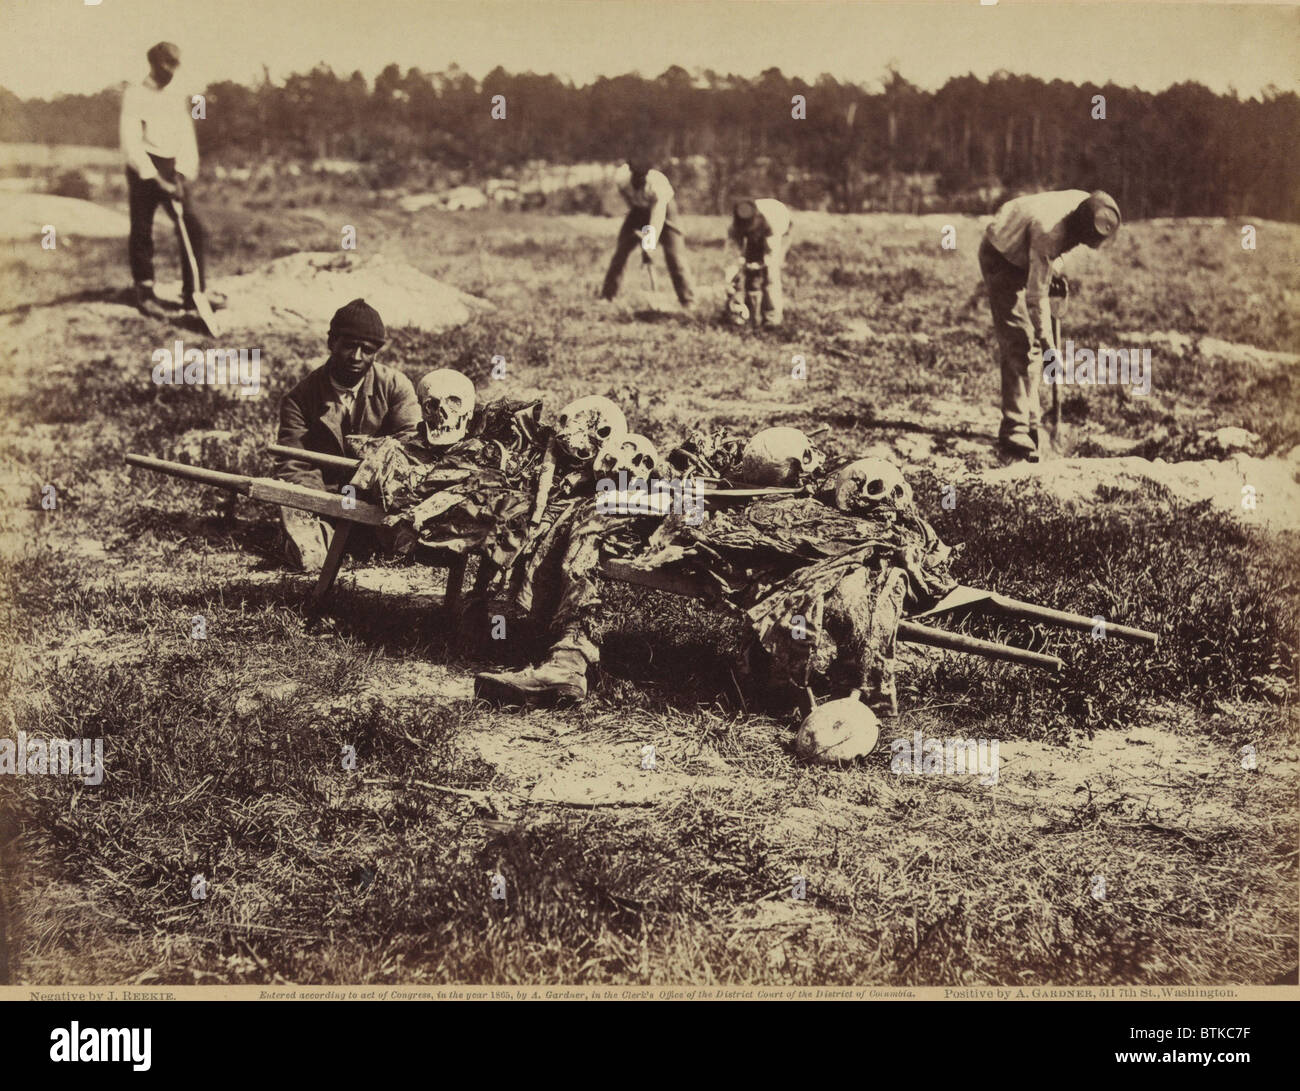 An African American soldier of a burial party on the battle-field of Cold Harbor seated next to a stretcher containing remains of Union soldiers who perished in the battles of Gaines' Mill and Cold Harbor. Assignment of a disproportionate number of African American soldiers to burial work continued in the 20th century. Stock Photo